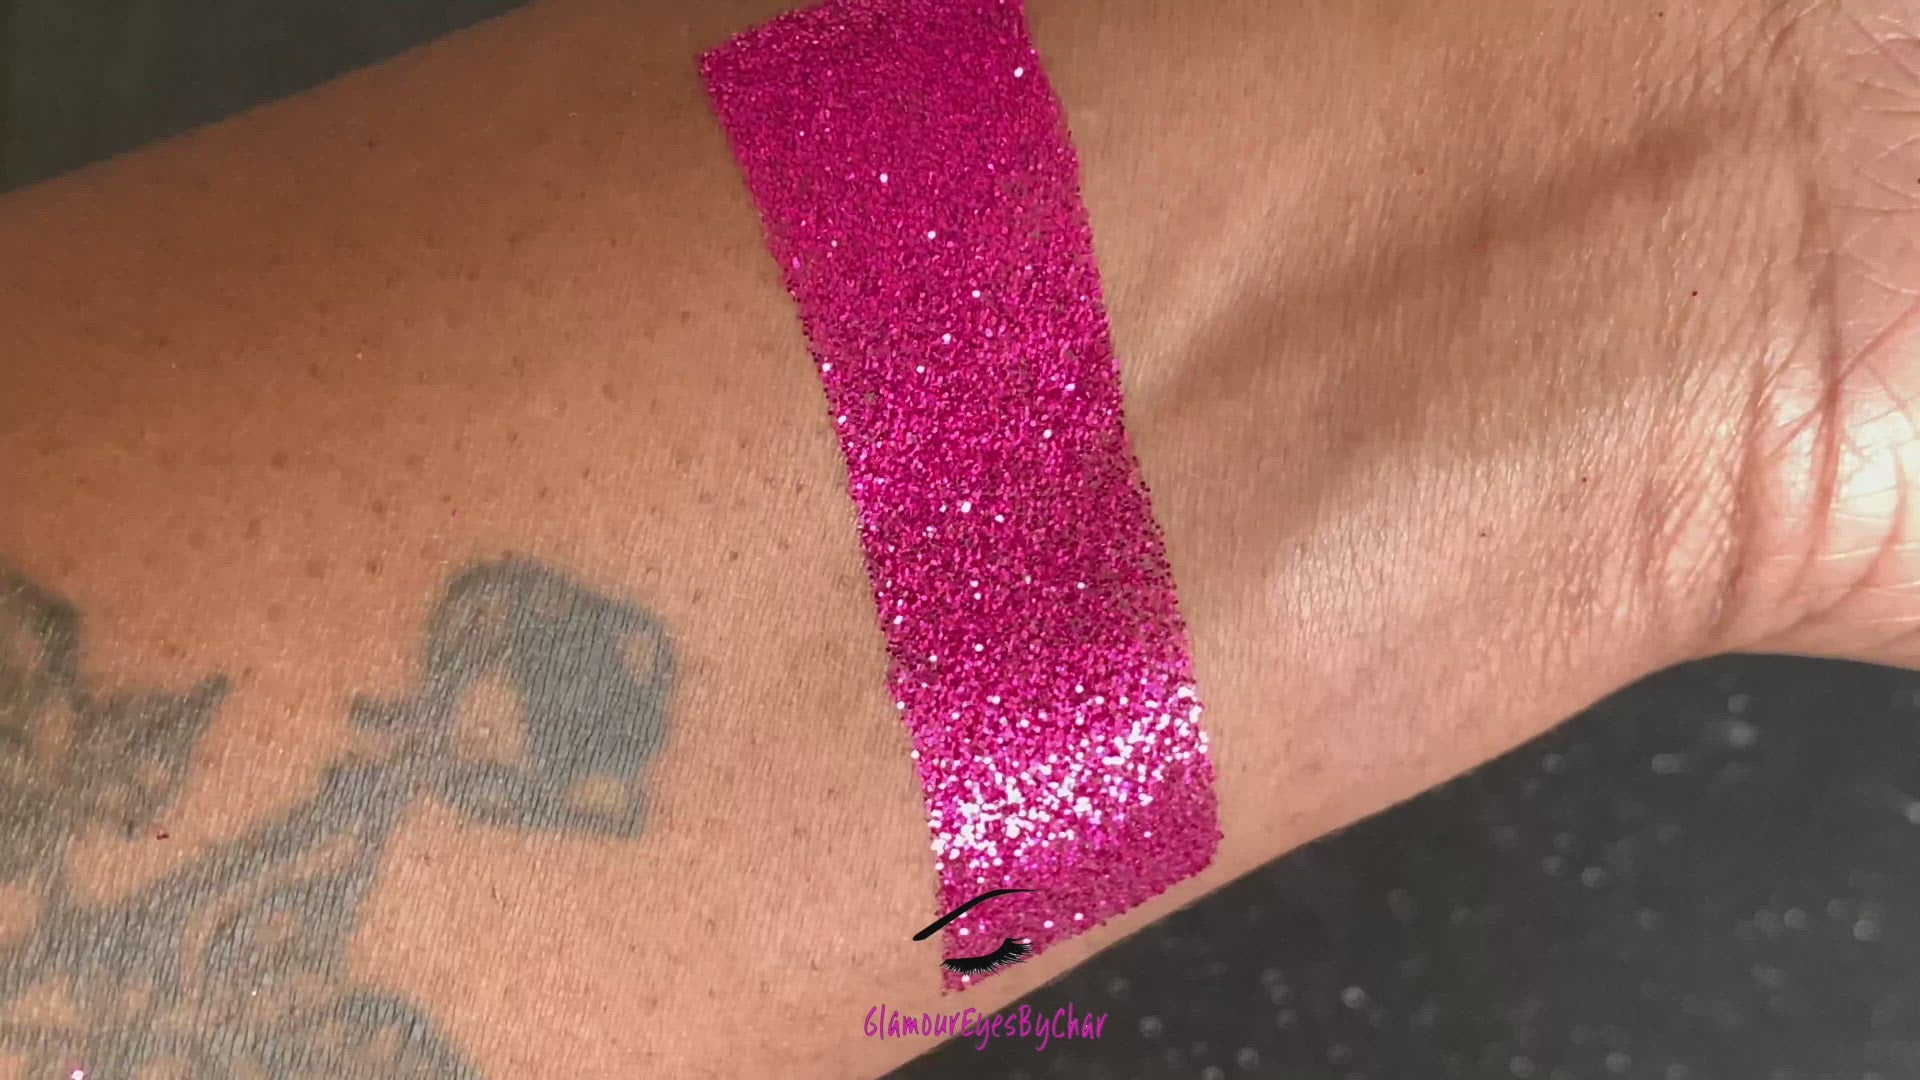 This glitter is called Mad Magenta and is part of the simple glitter collection. It consists of metallic magenta glitter.  Mad Magenta can be used for your face, body, hair and nails. Comes in 5g and 10g jars. 